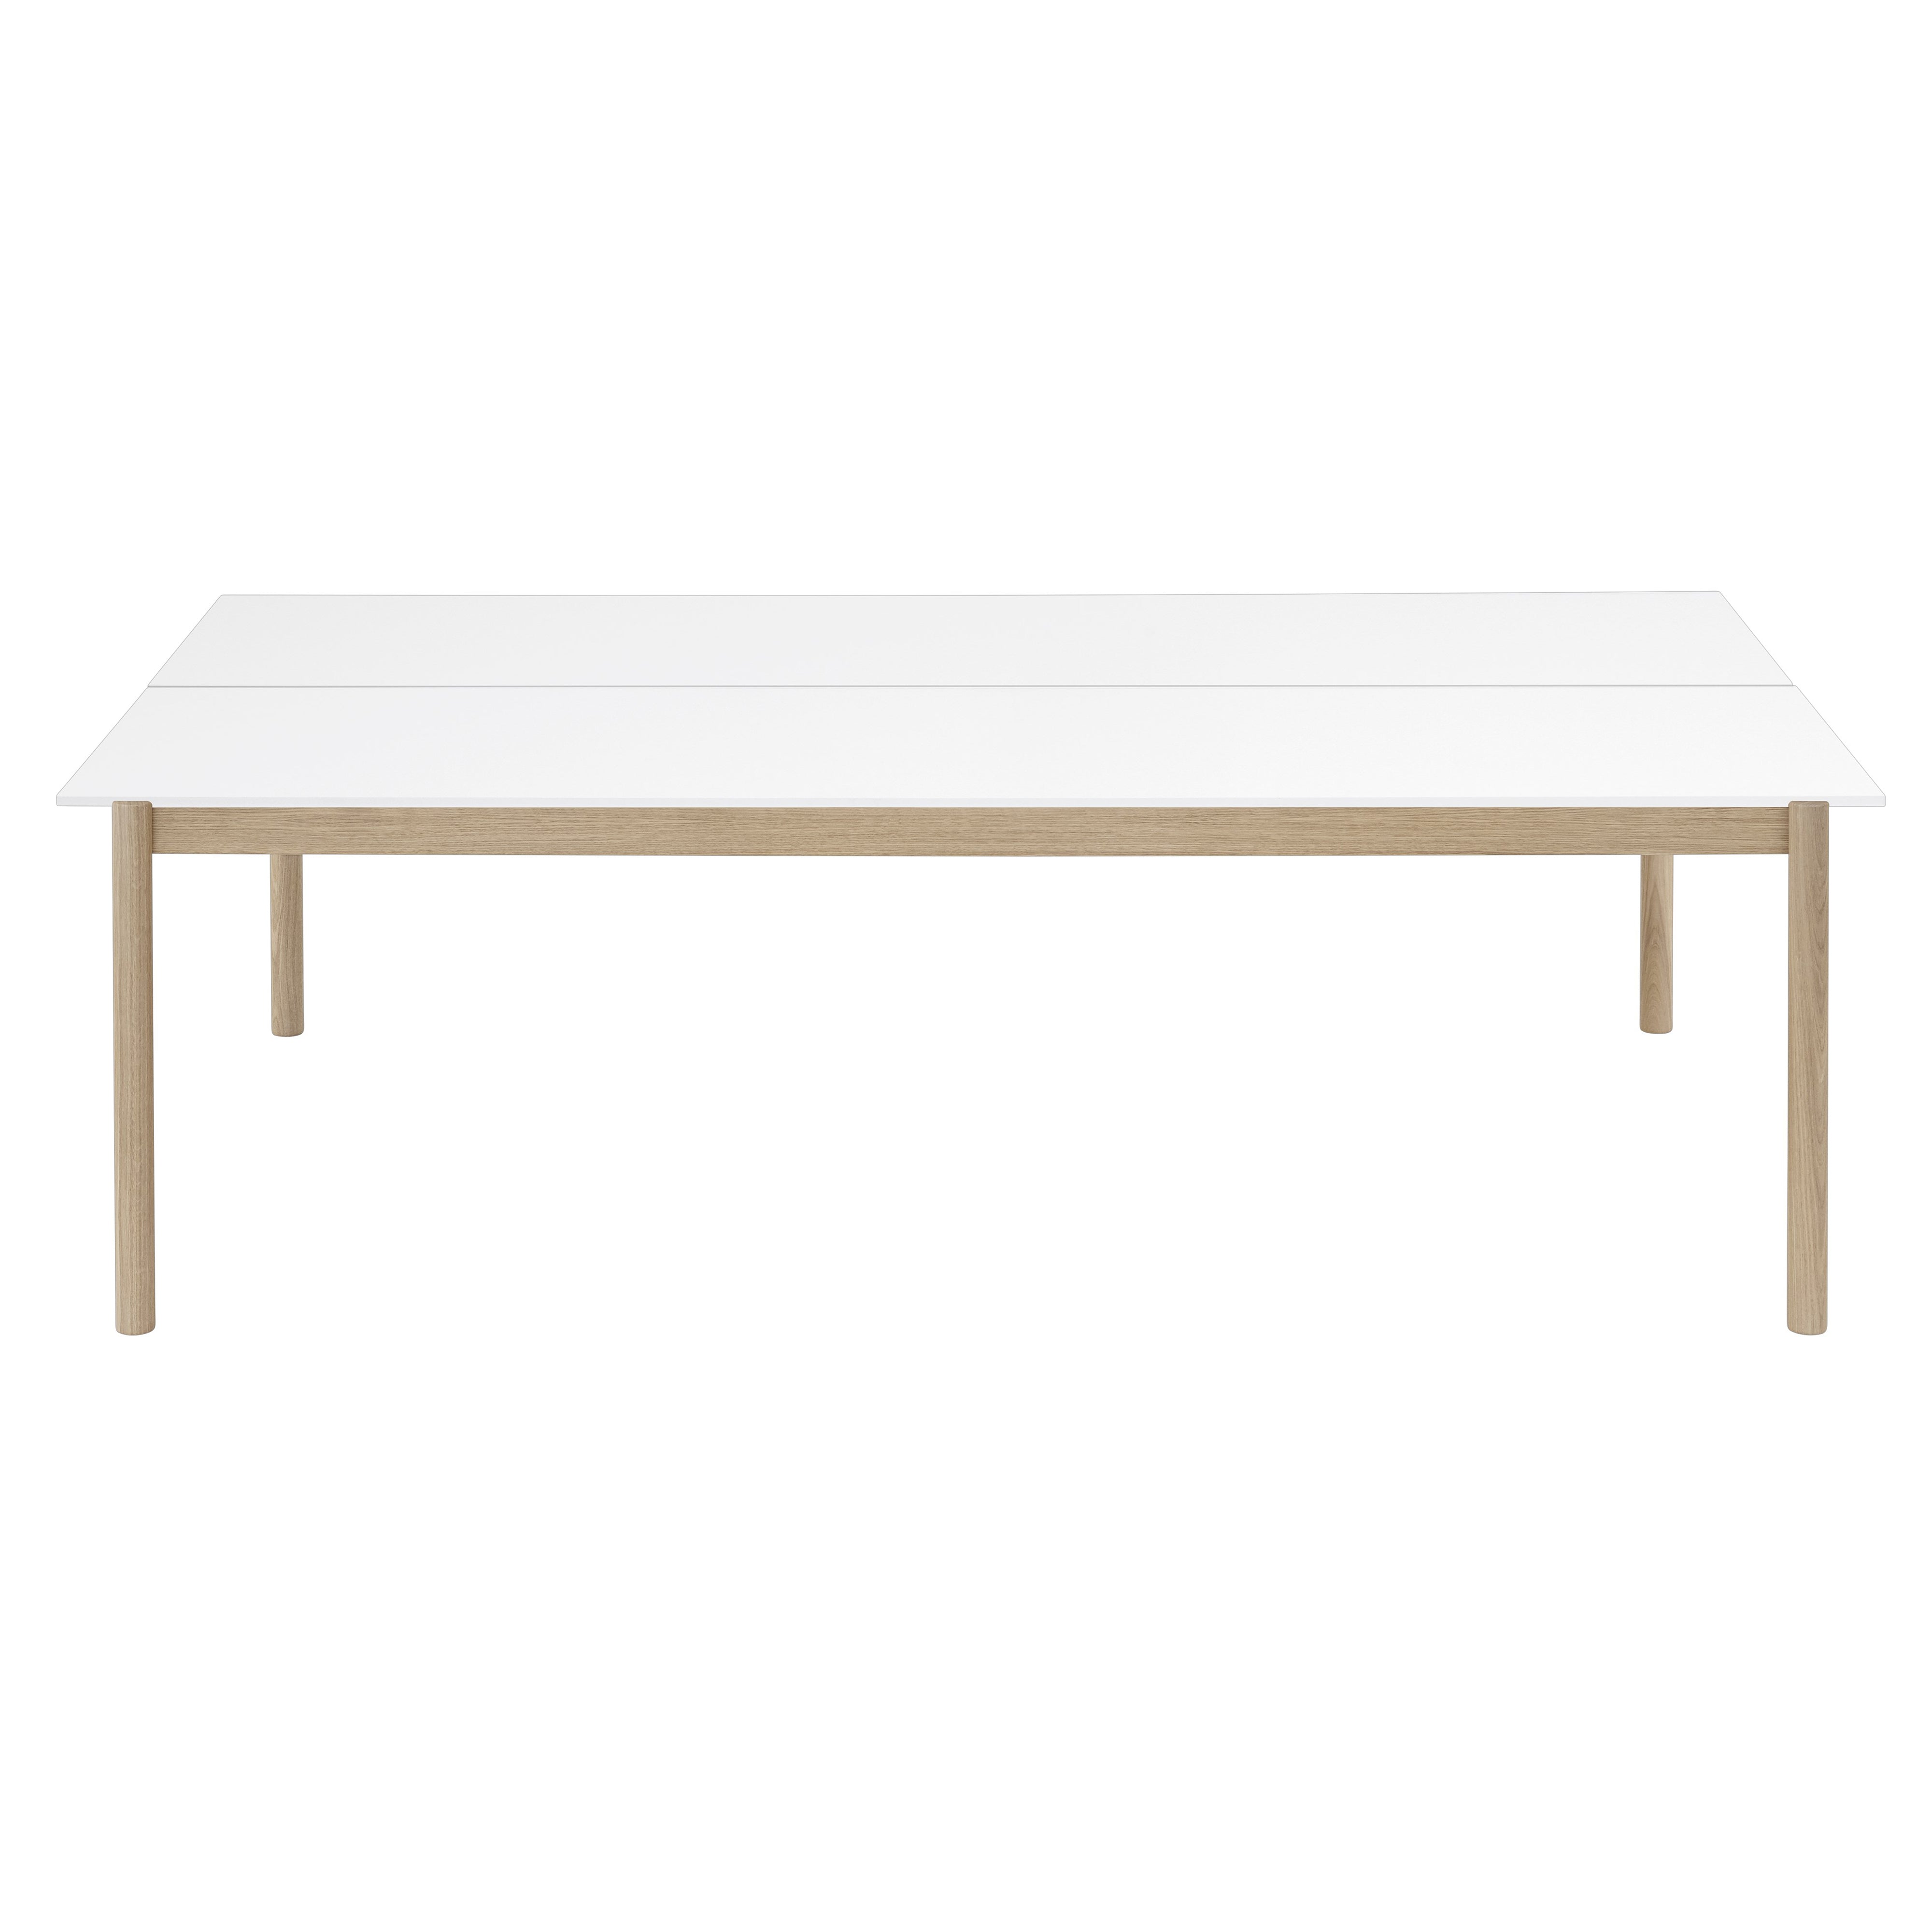 Linear System Table: White Laminate + ABS Edge